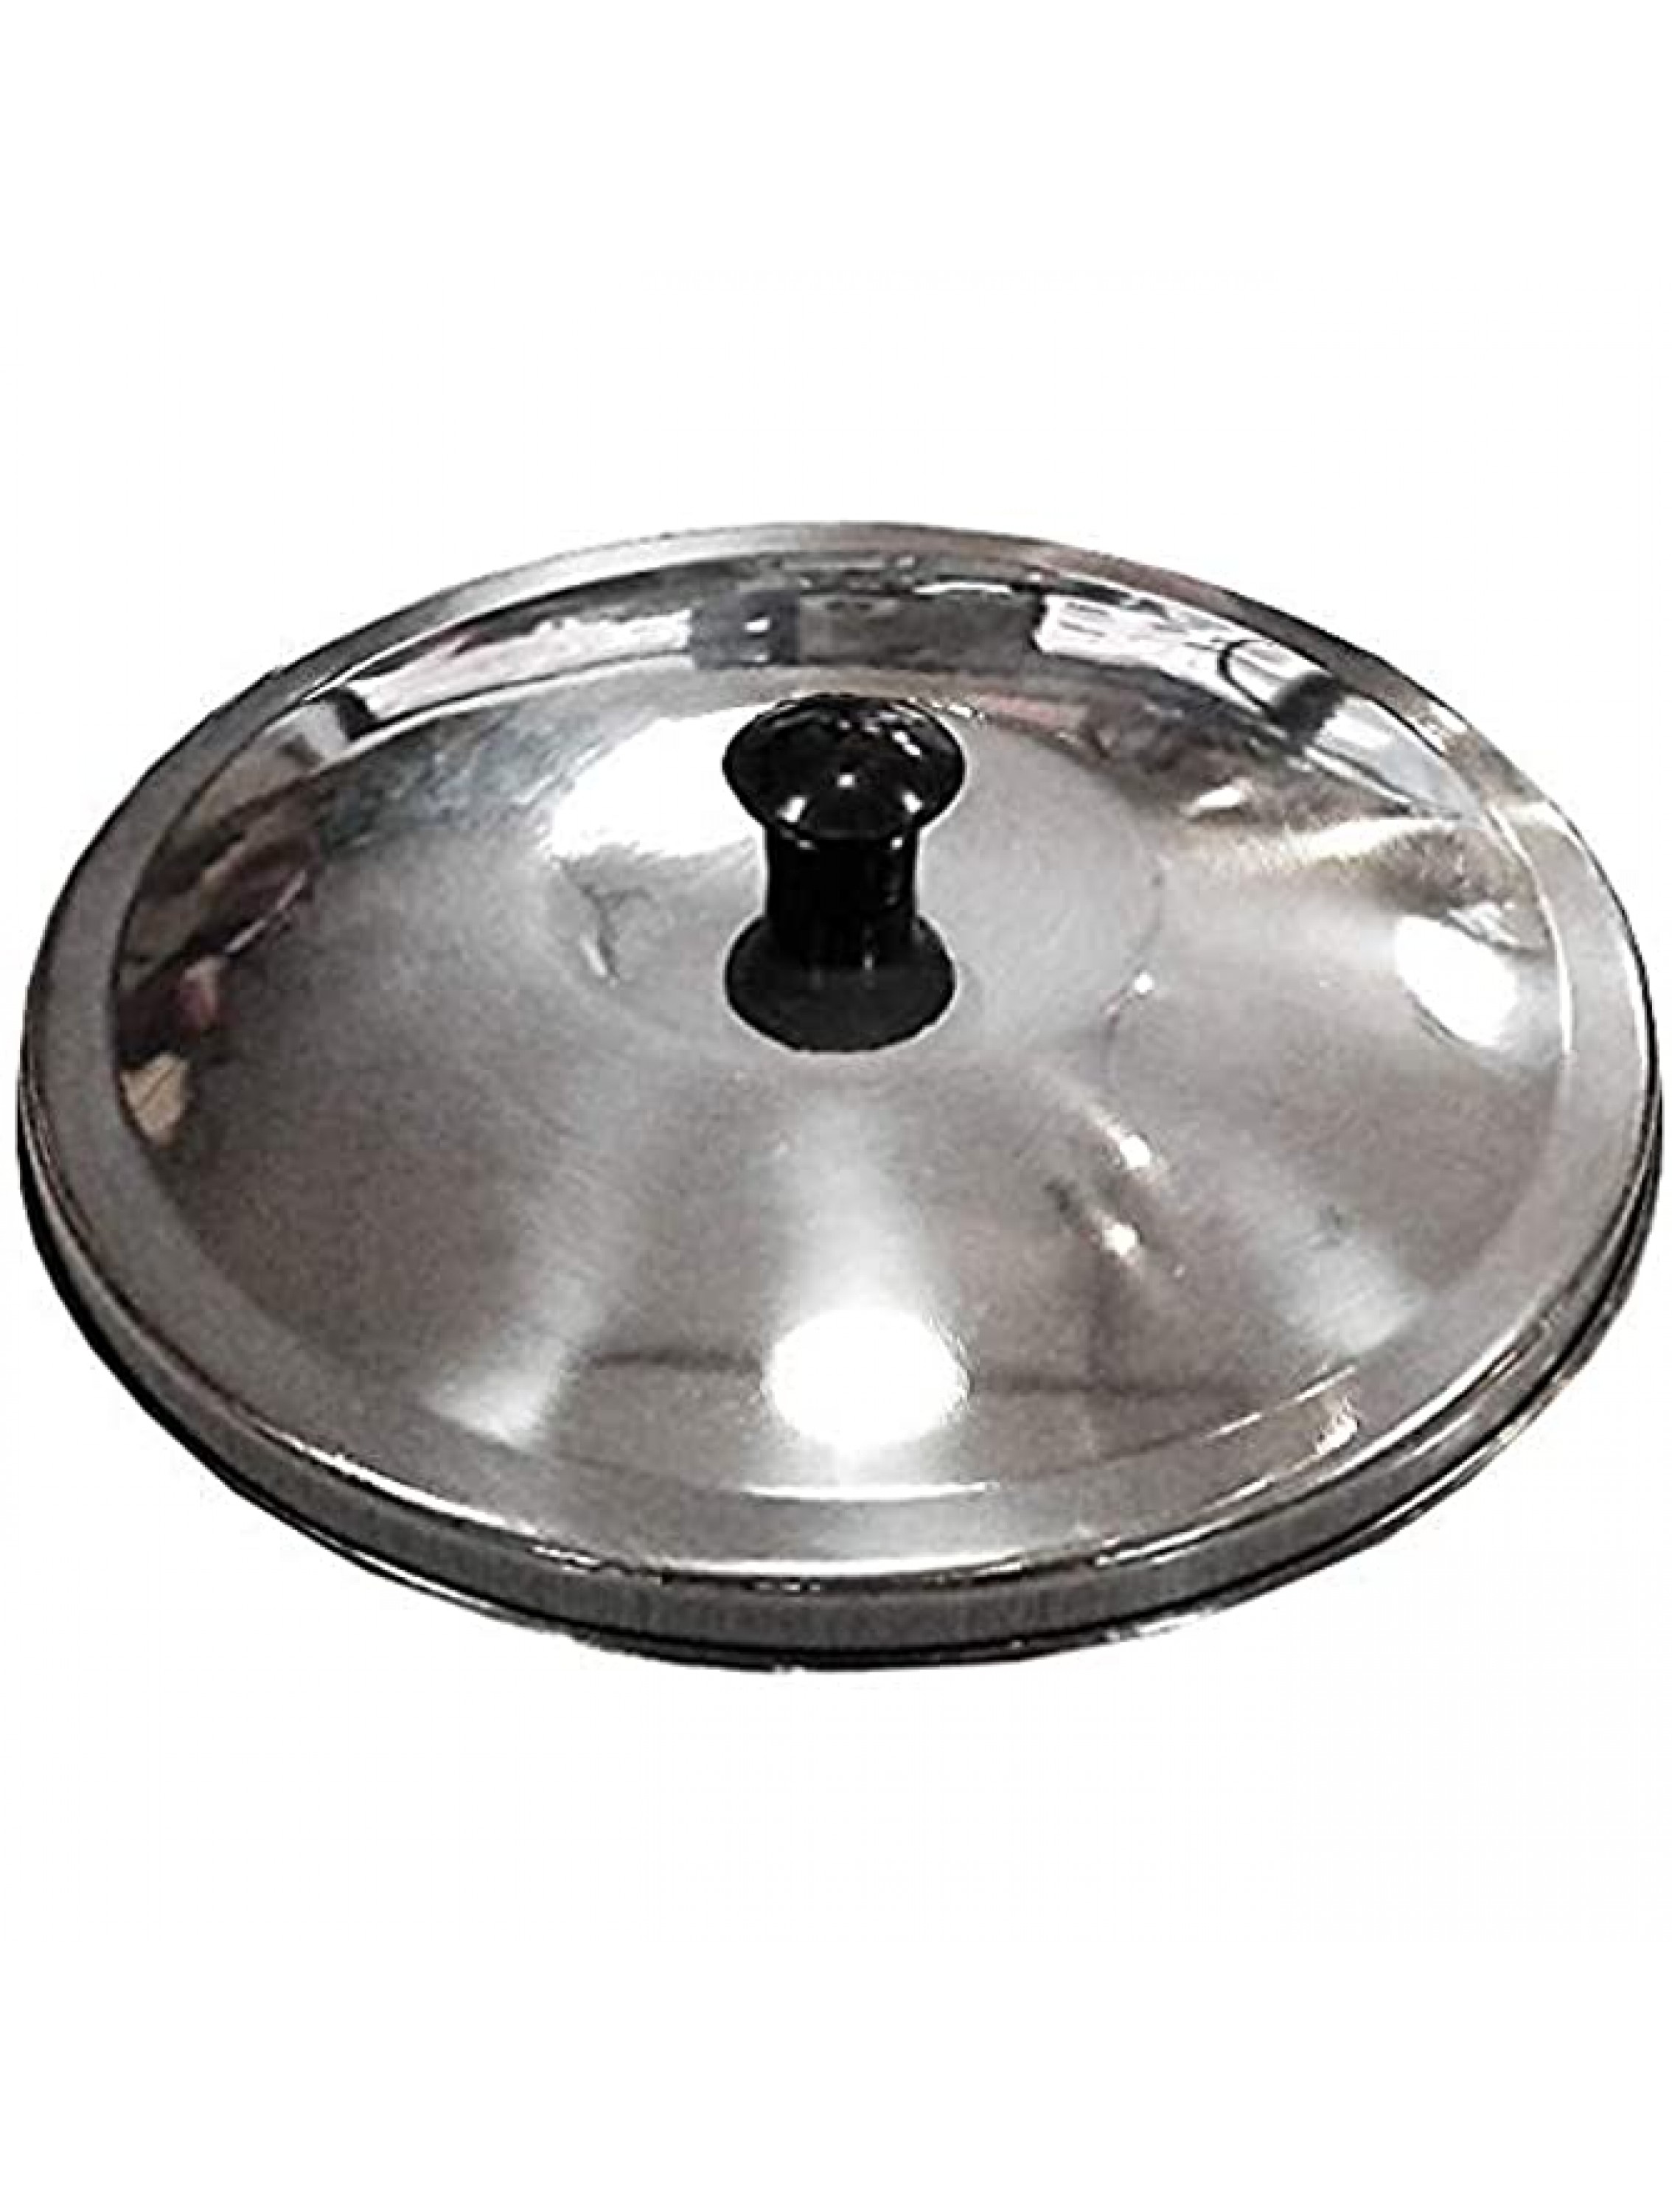 Stainless Steel Dim Sum Steamer Lid 4.5Lid - BHXF8T9HV